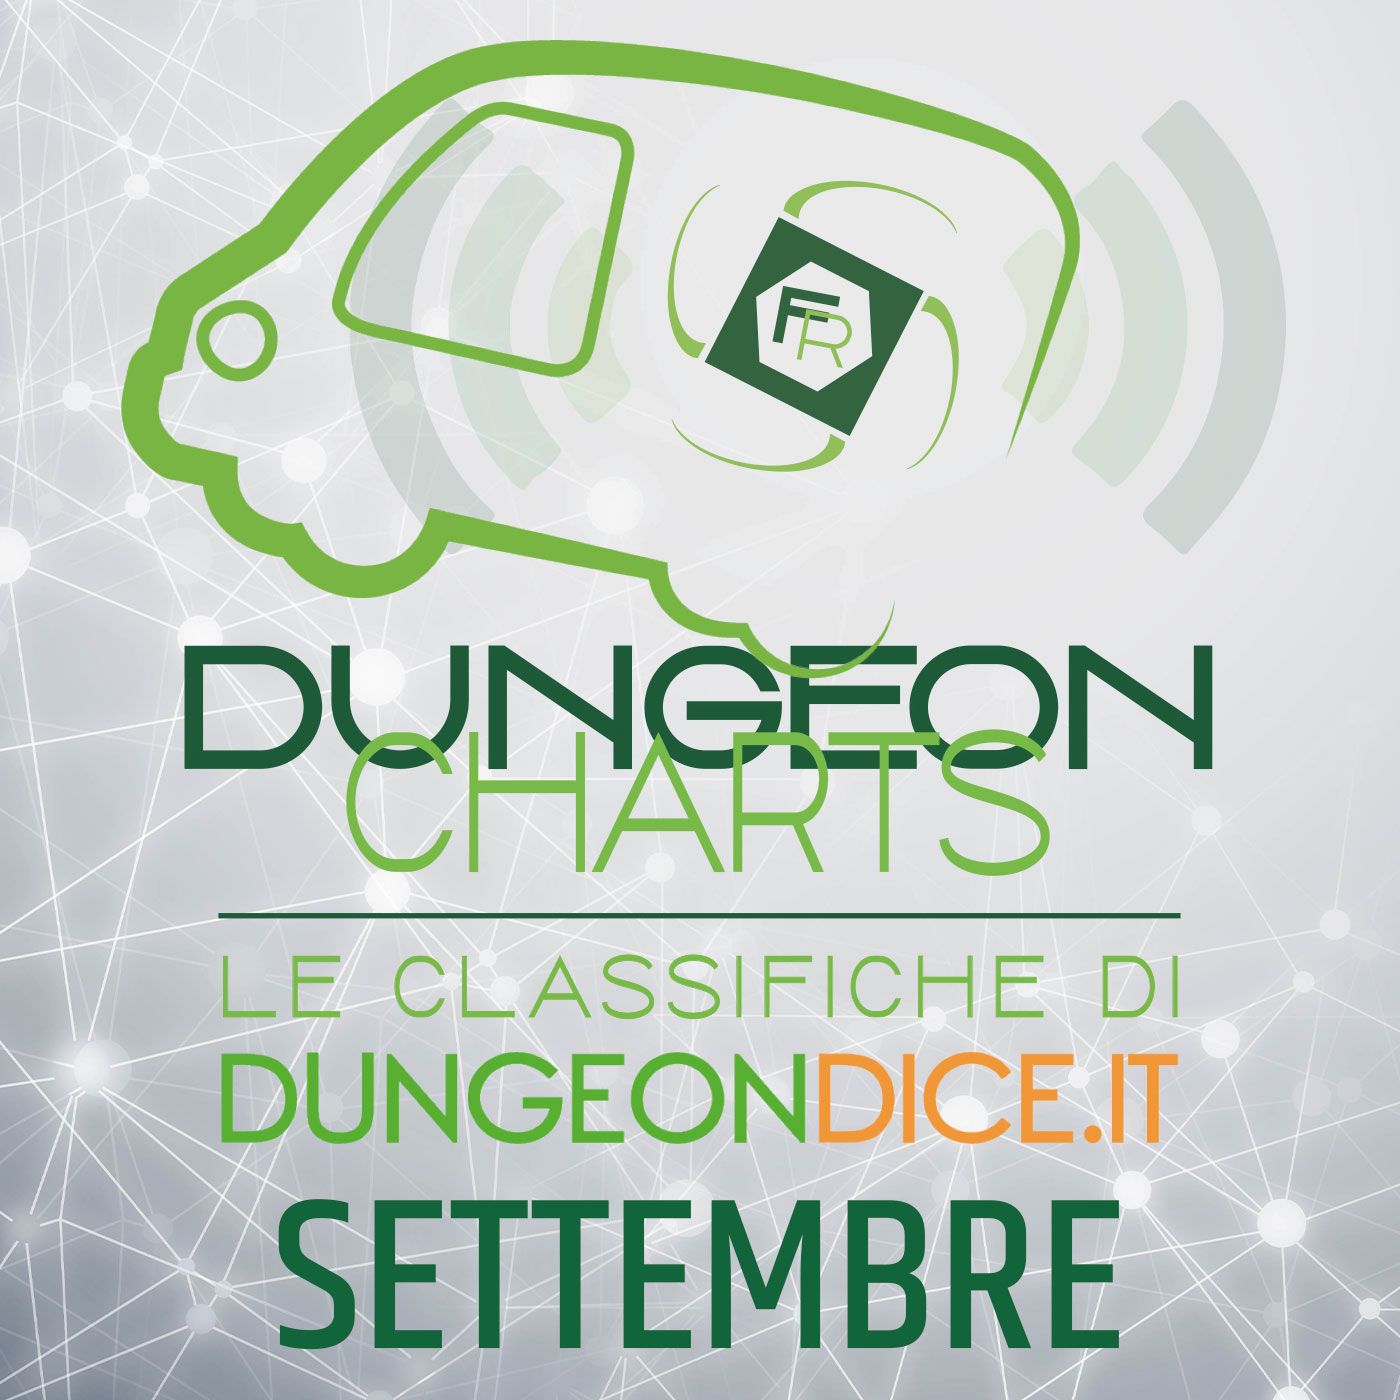 Dungeon Charts - Settembre 2021